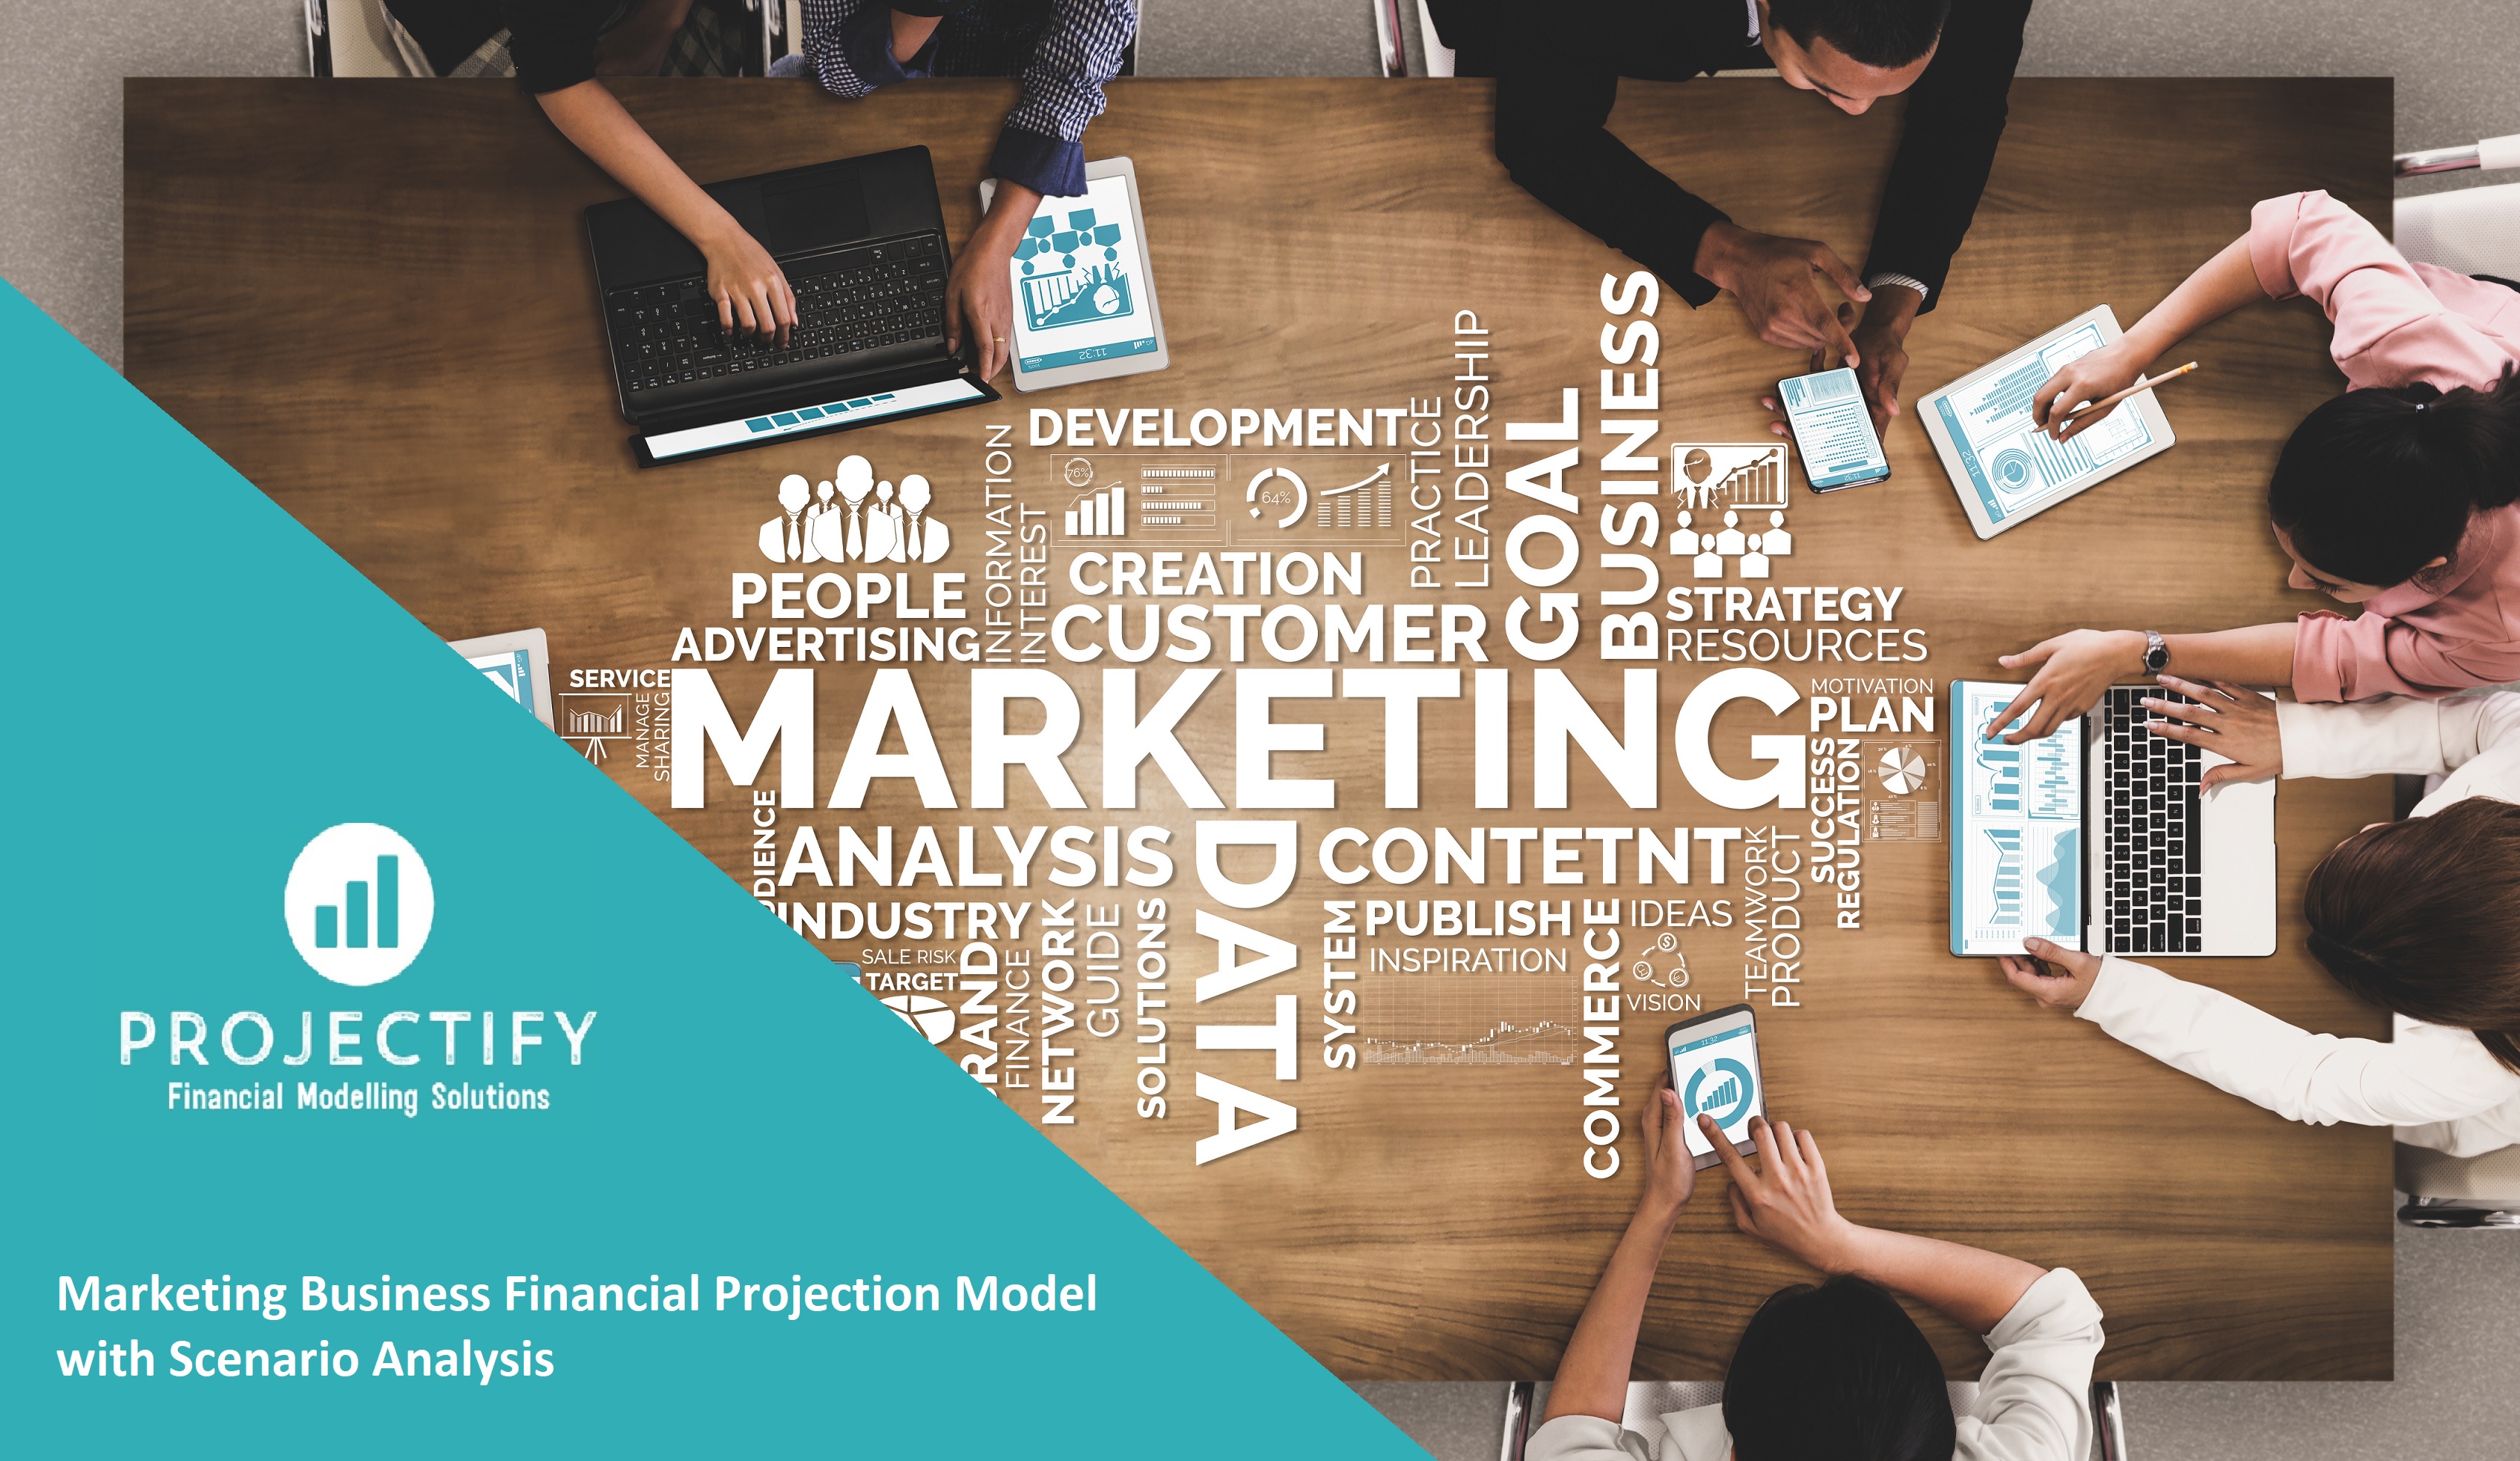 Marketing Business Financial Projection 3 Statement Model with Scenario Analysis (Excel template (XLSX)) Preview Image